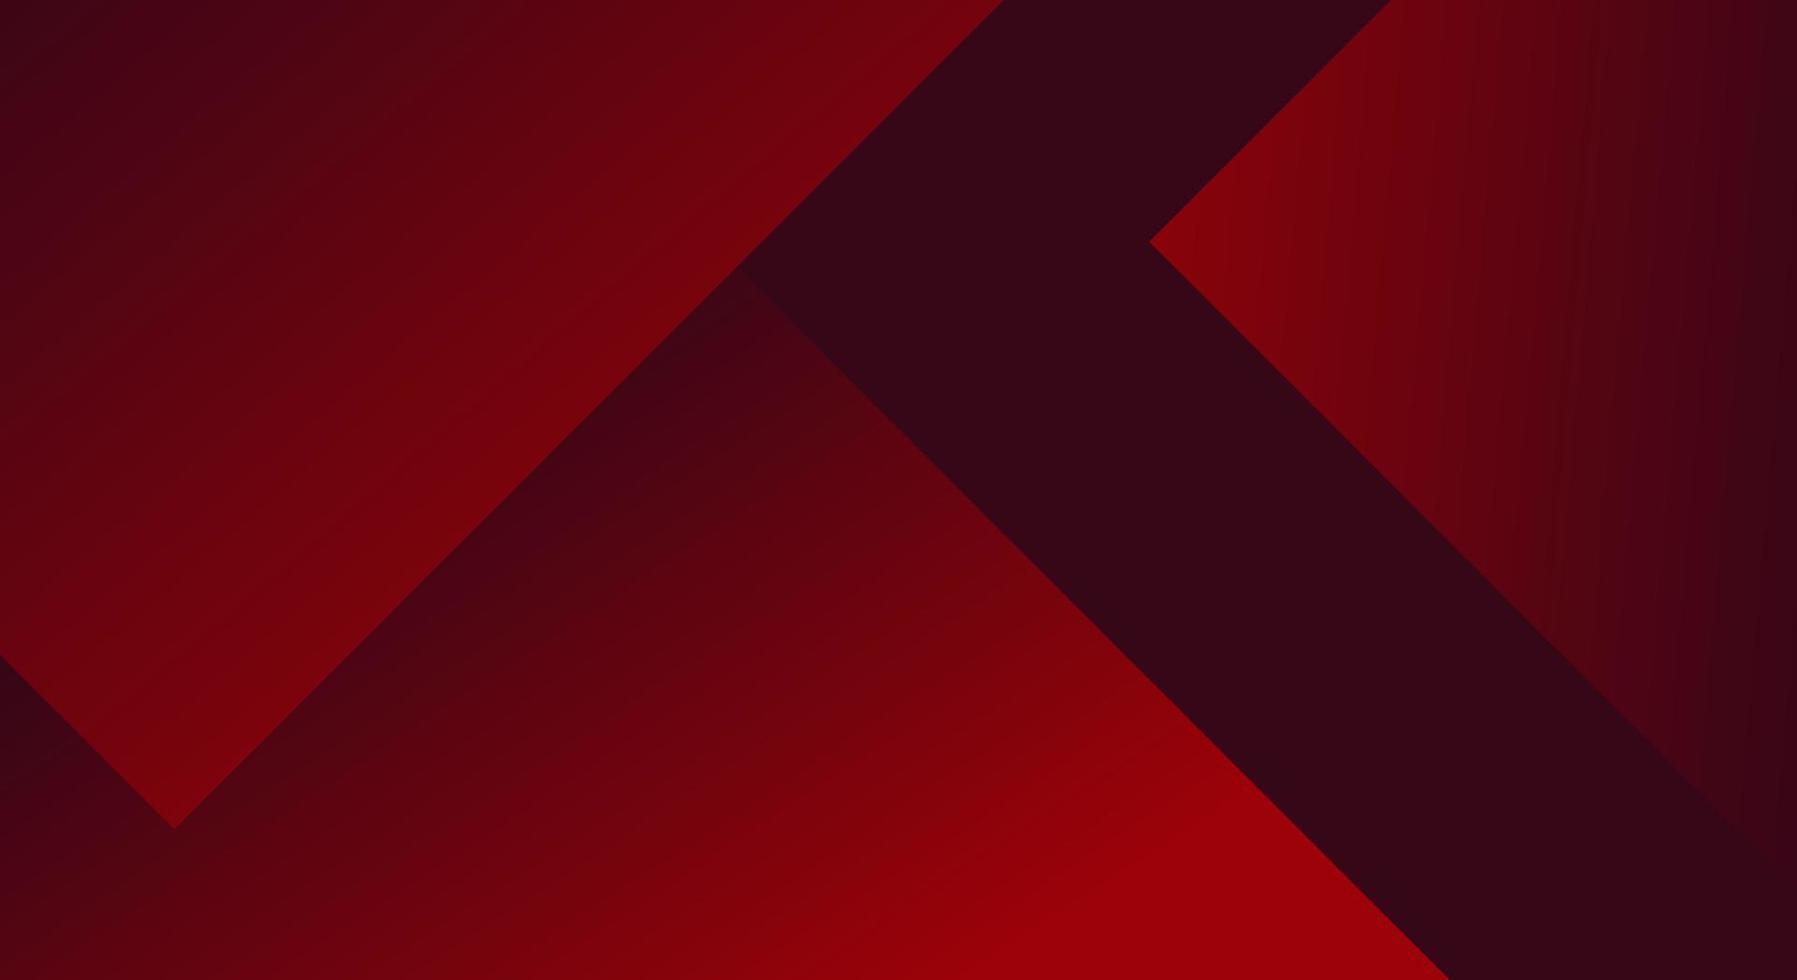 Red Passion Abstract Geometric Background for Cover Design, Book Design, Presentation, Website, Poster, Flyer, Advertising, Brochure with Copy Space for Text or Message vector